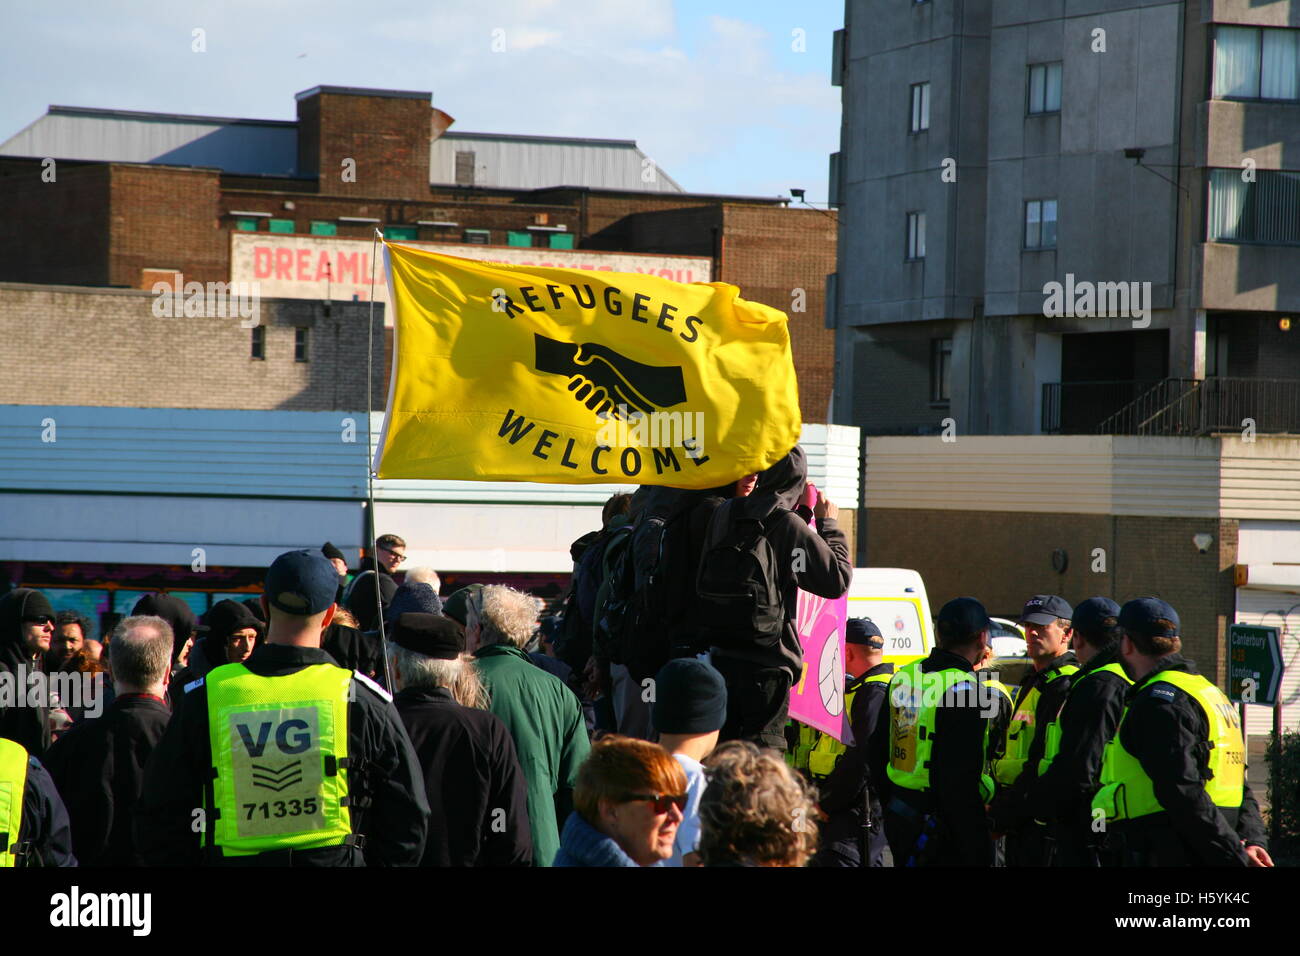 Margate, Kent, UK. 22nd October, 2016. Refugees Welcome flag. The right wing group White Lives Matter (WLM) march in the town. This is the first WLM demonstration in the UK. A counter demonstration, Margate Rocks Against Racism (MRAR) is taking place in the town at the same time. Penelope Barritt/Alamy Live News Stock Photo